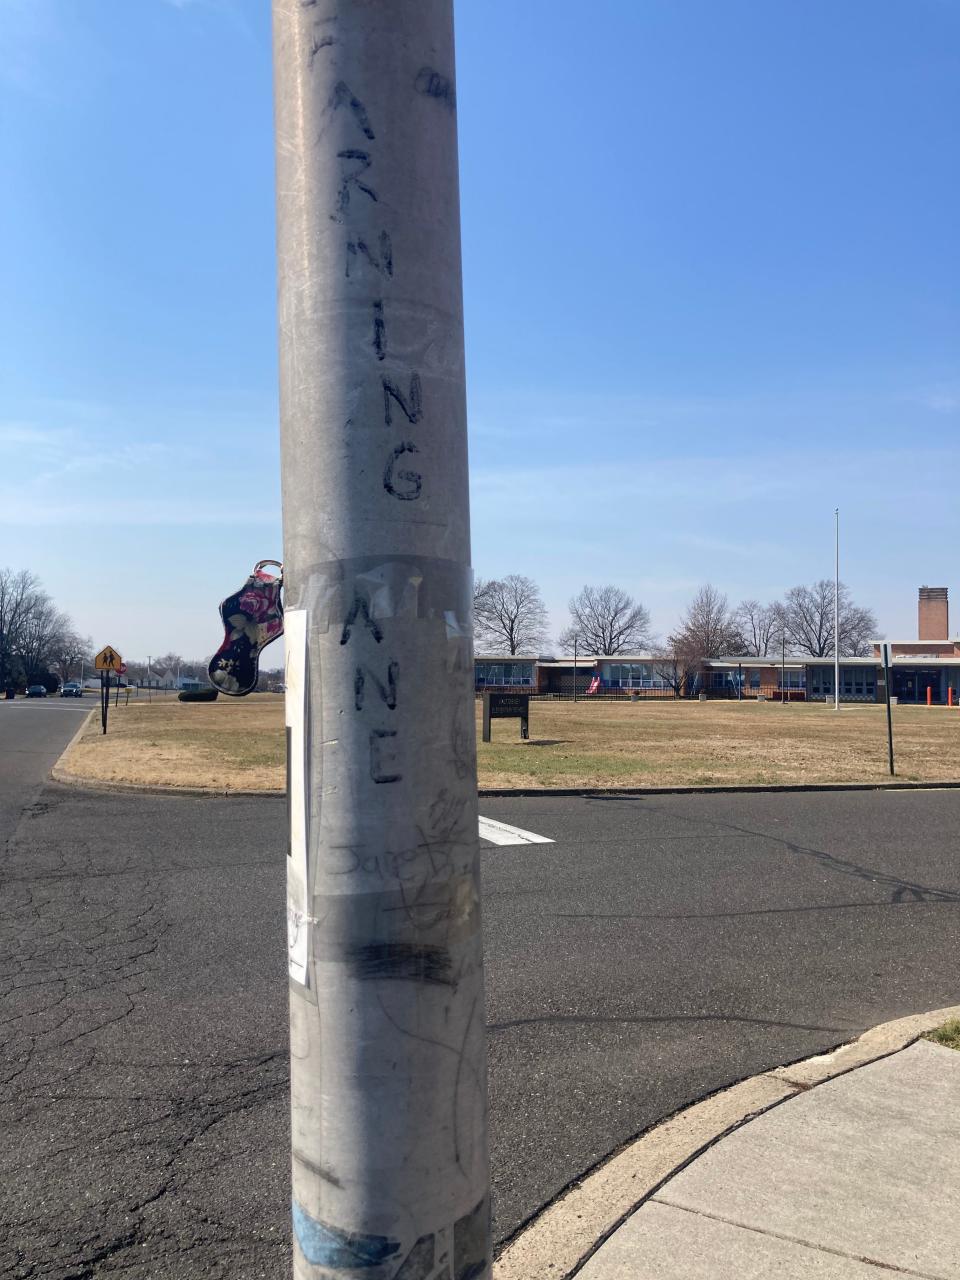 The Learning Lane street sign is the most stolen street sign in Tullytown. Like Smoketree Road in Middletown, the street name has been written on the light pole.